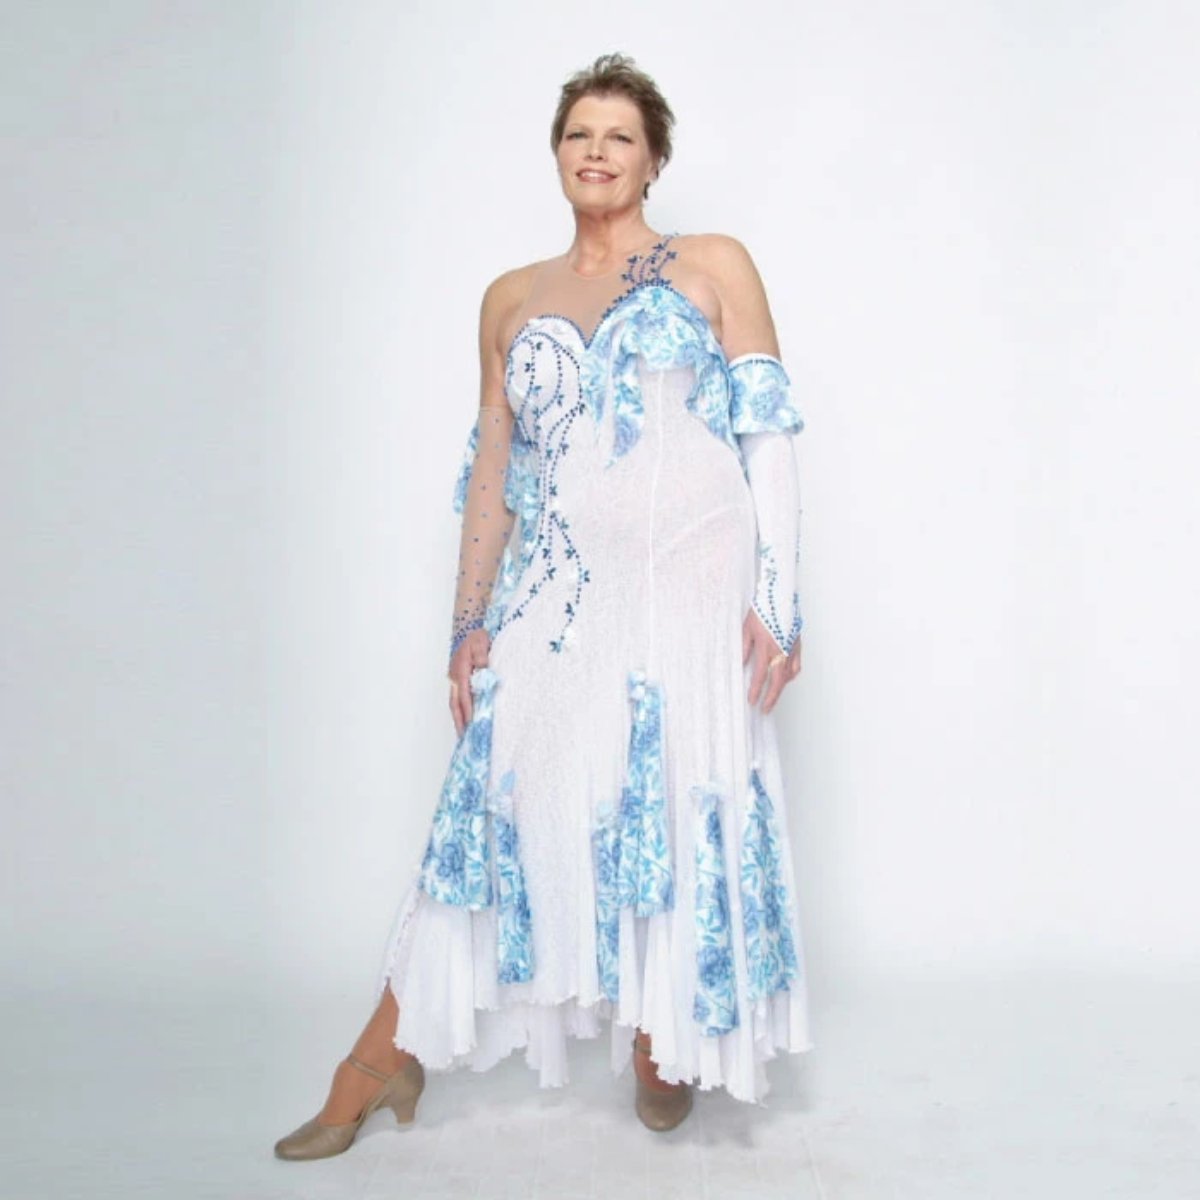 White ballroom dress with blue accents was created on nude illusion of a soft white knit with flounce accents of sky blue & white floral print satin, embellished with sapphire Swarovski stonework & miniature white silk roses. 